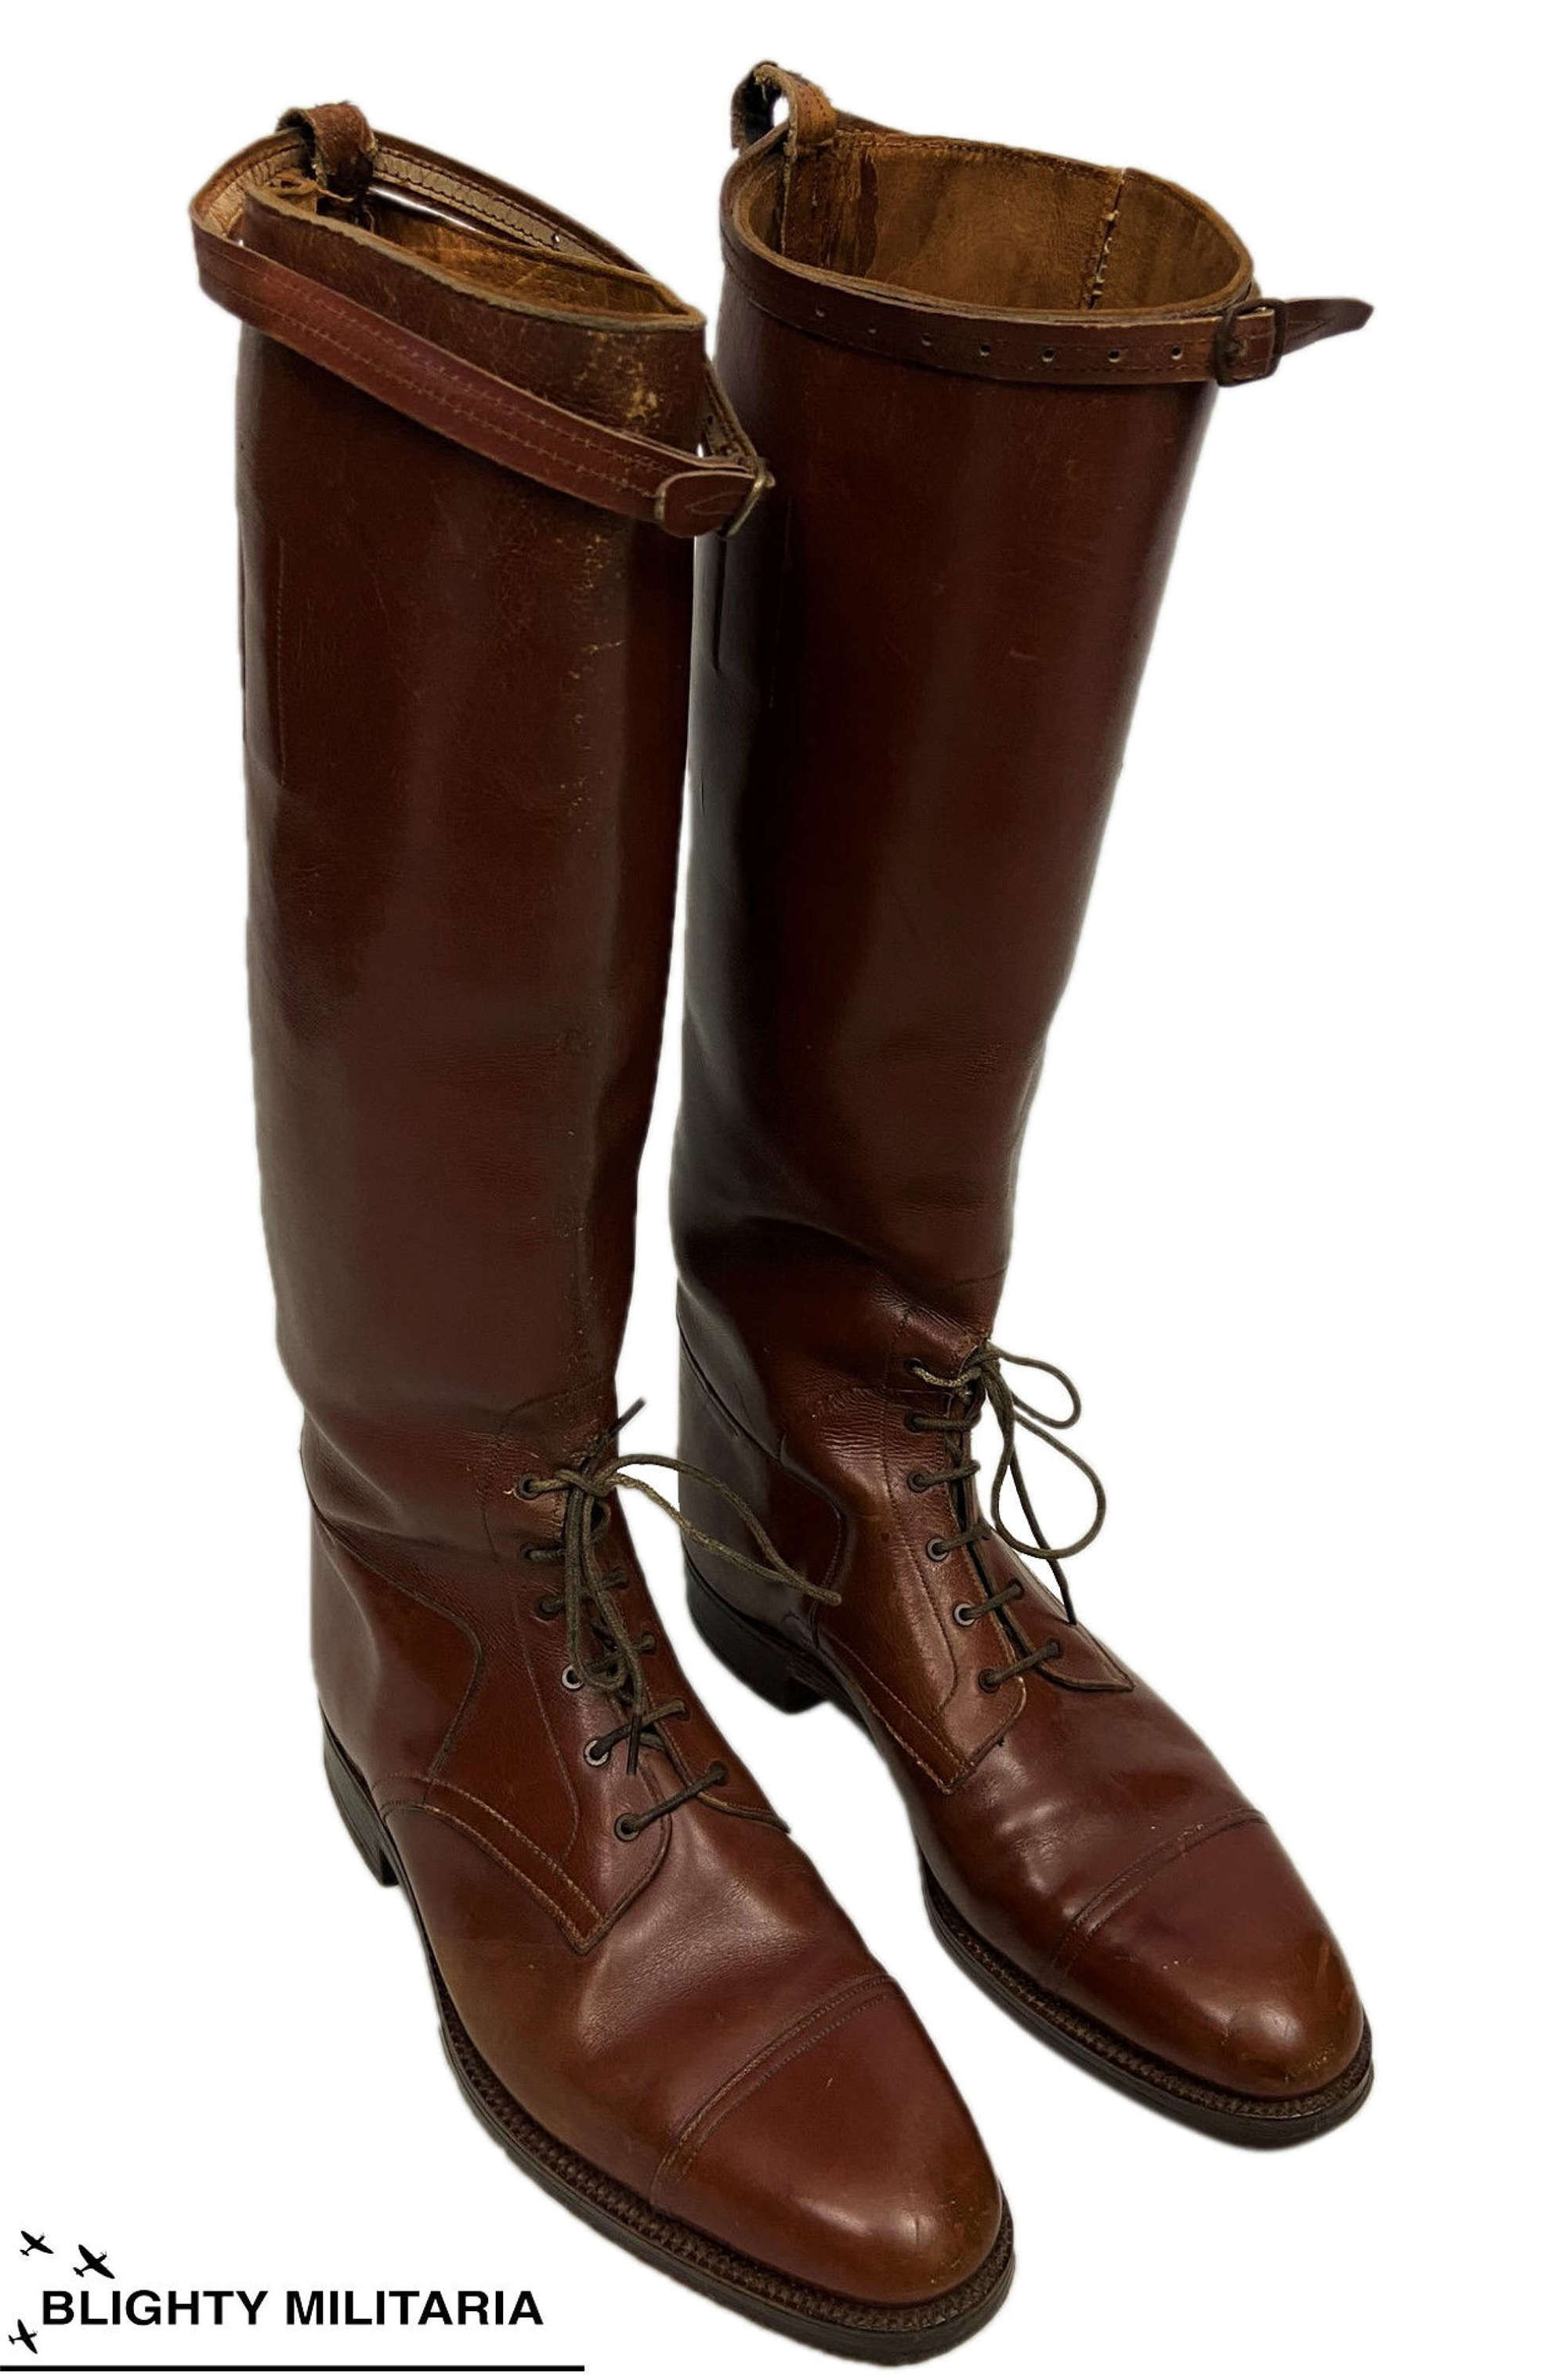 Original US Army Officers Riding Boots by 'Military Stores'